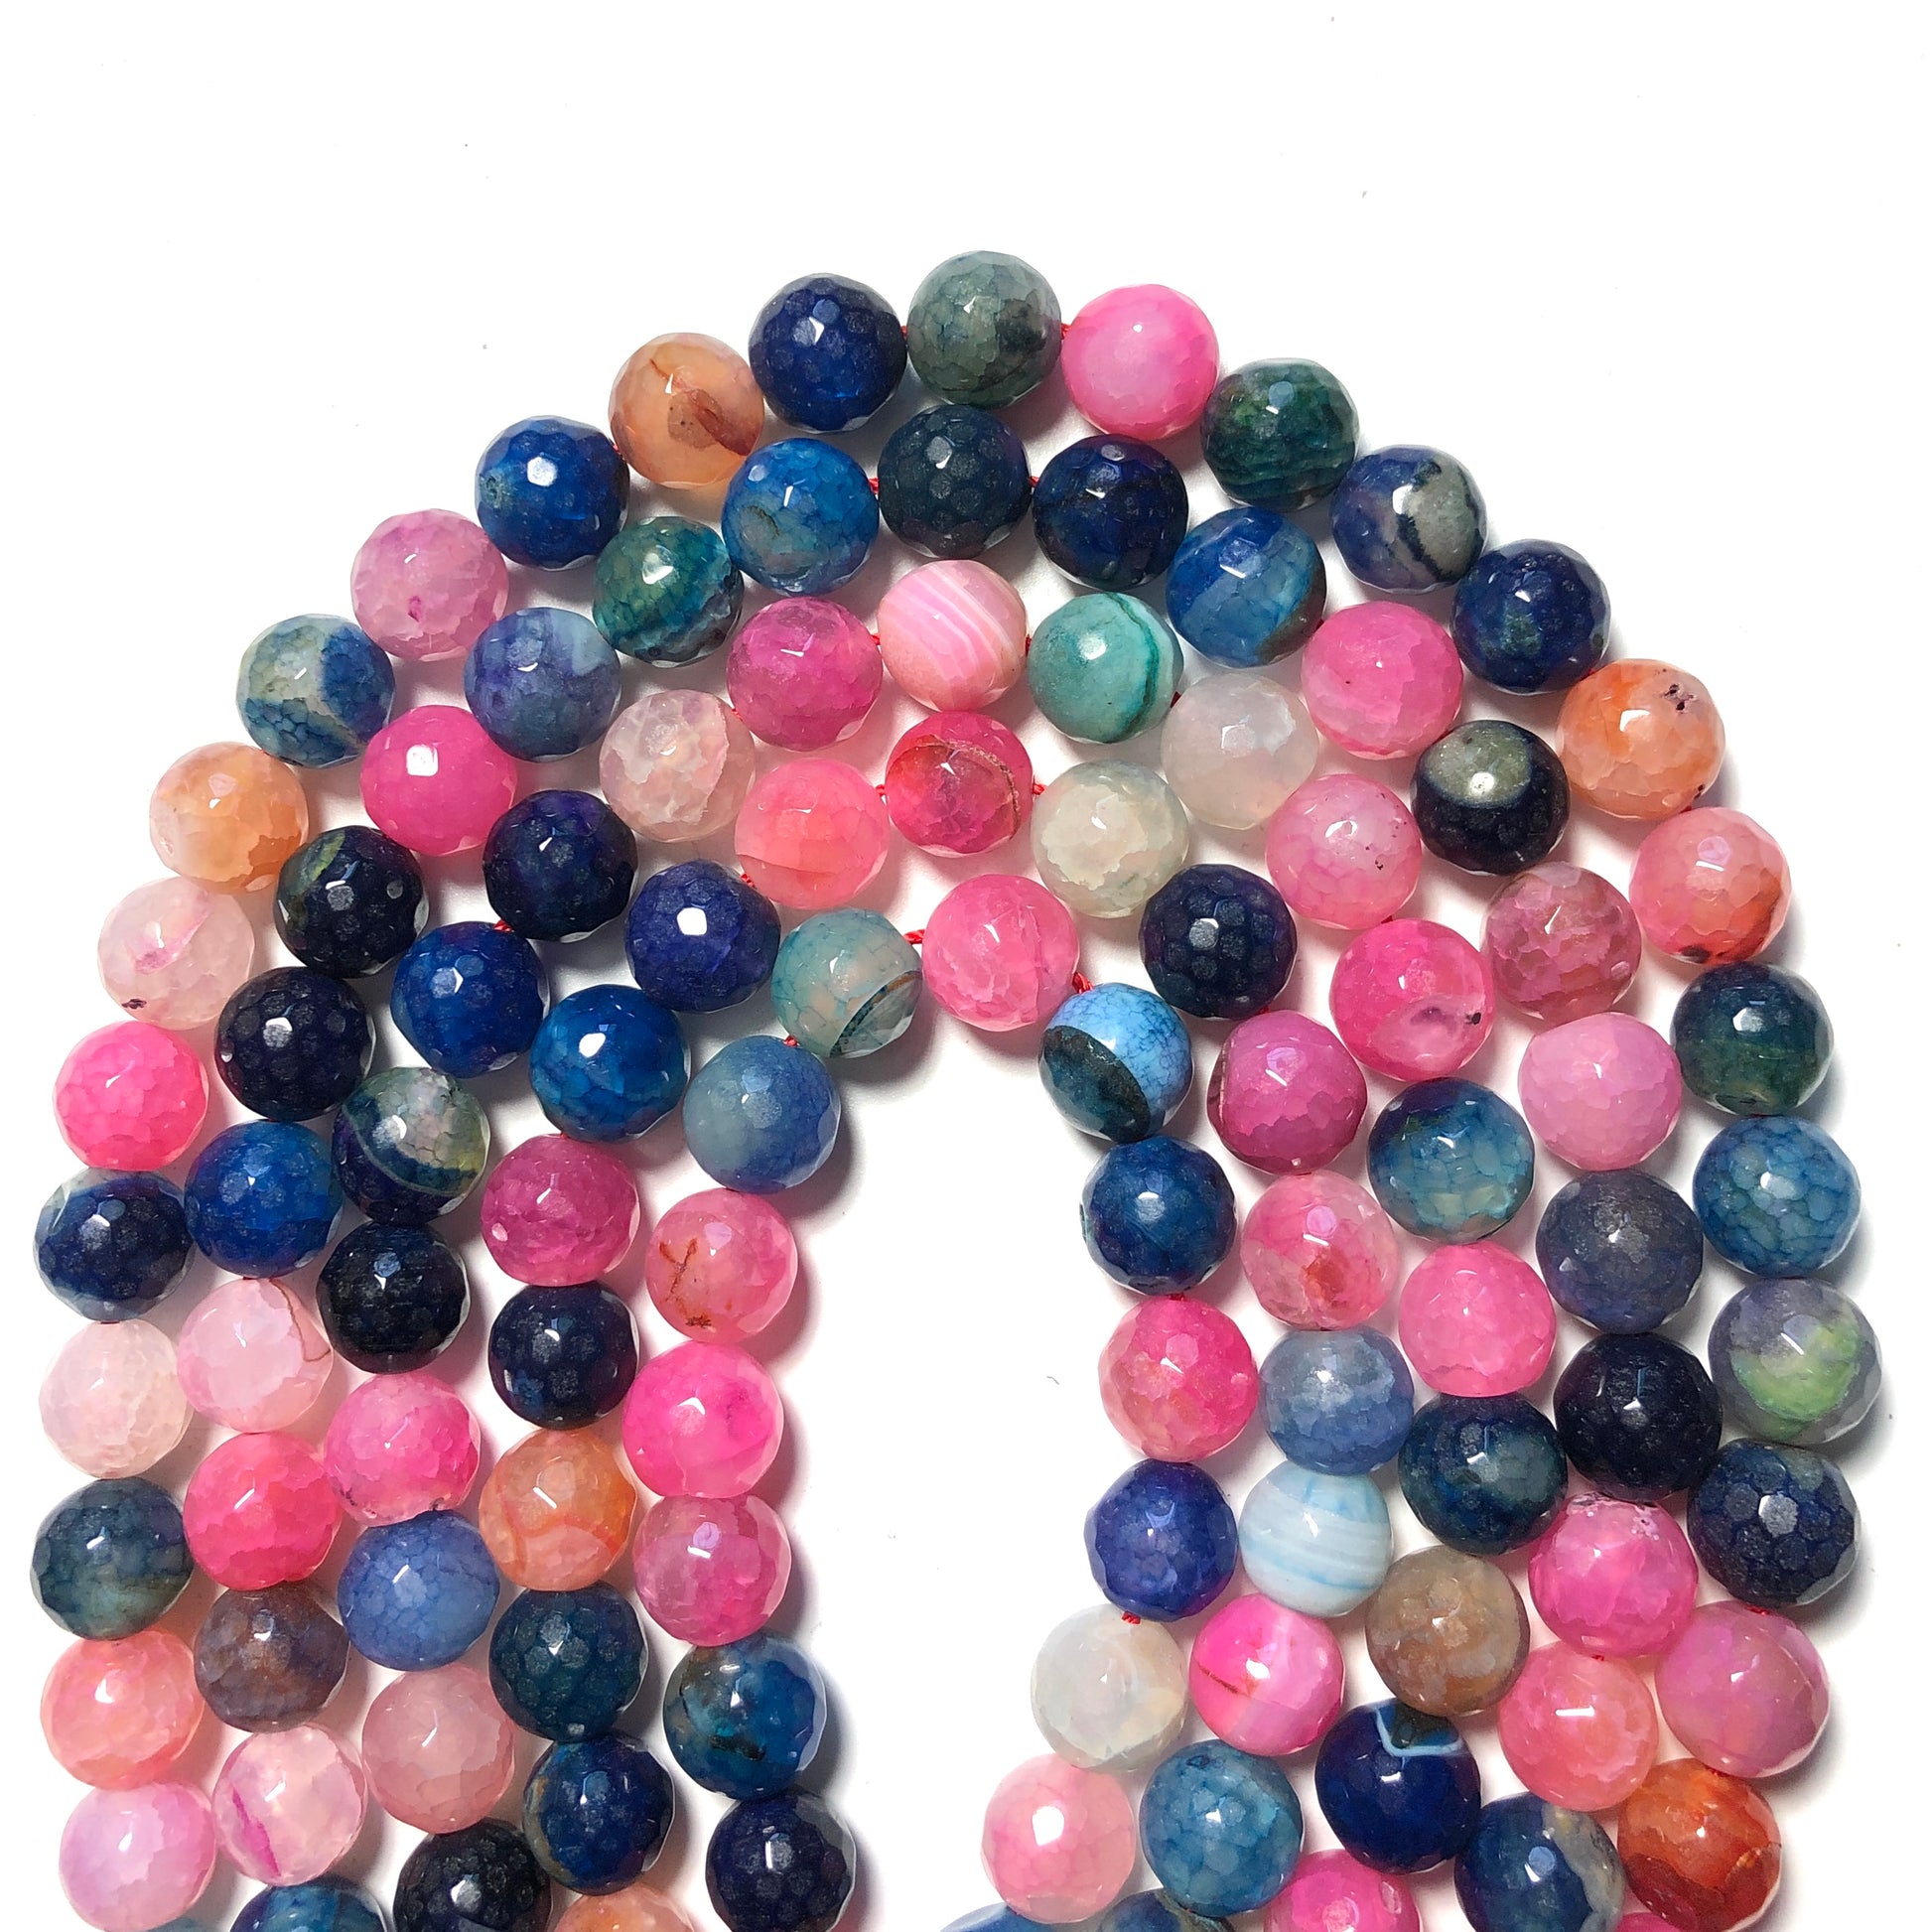 2 Strands/lot 12mm Pink Blue Faceted Dragon Agate Stone Beads Stone Beads 12mm Stone Beads Faceted Agate Beads Charms Beads Beyond